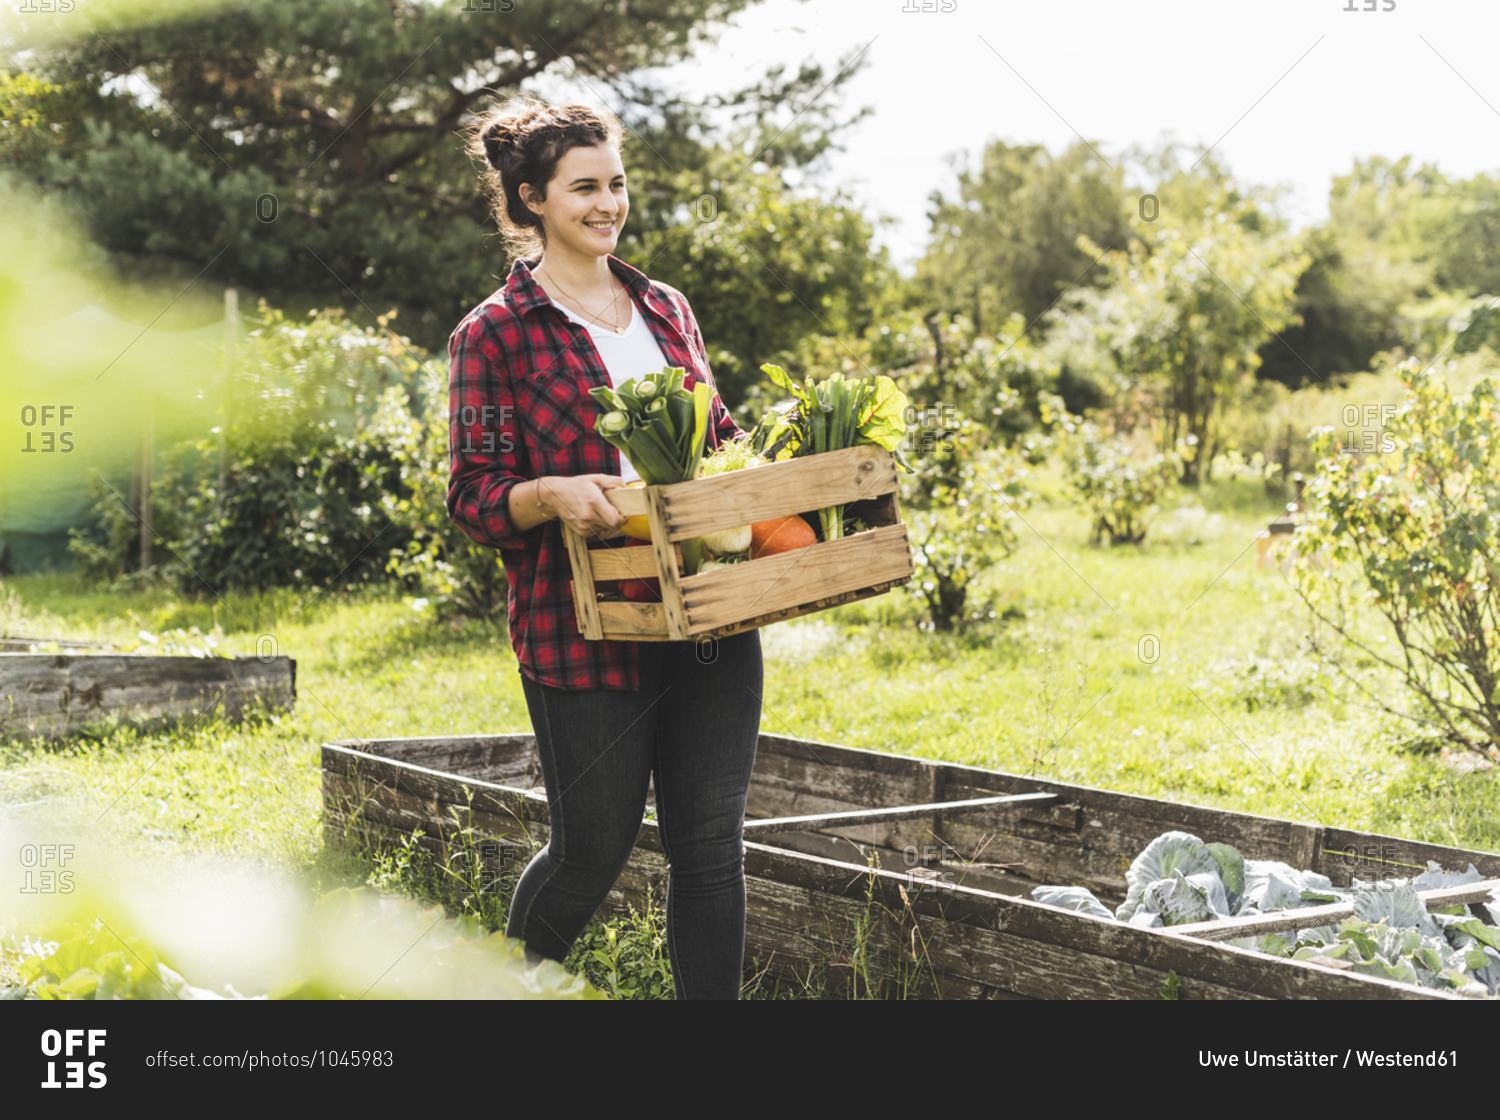 Smiling young woman carrying wooden crate with vegetables in community garden